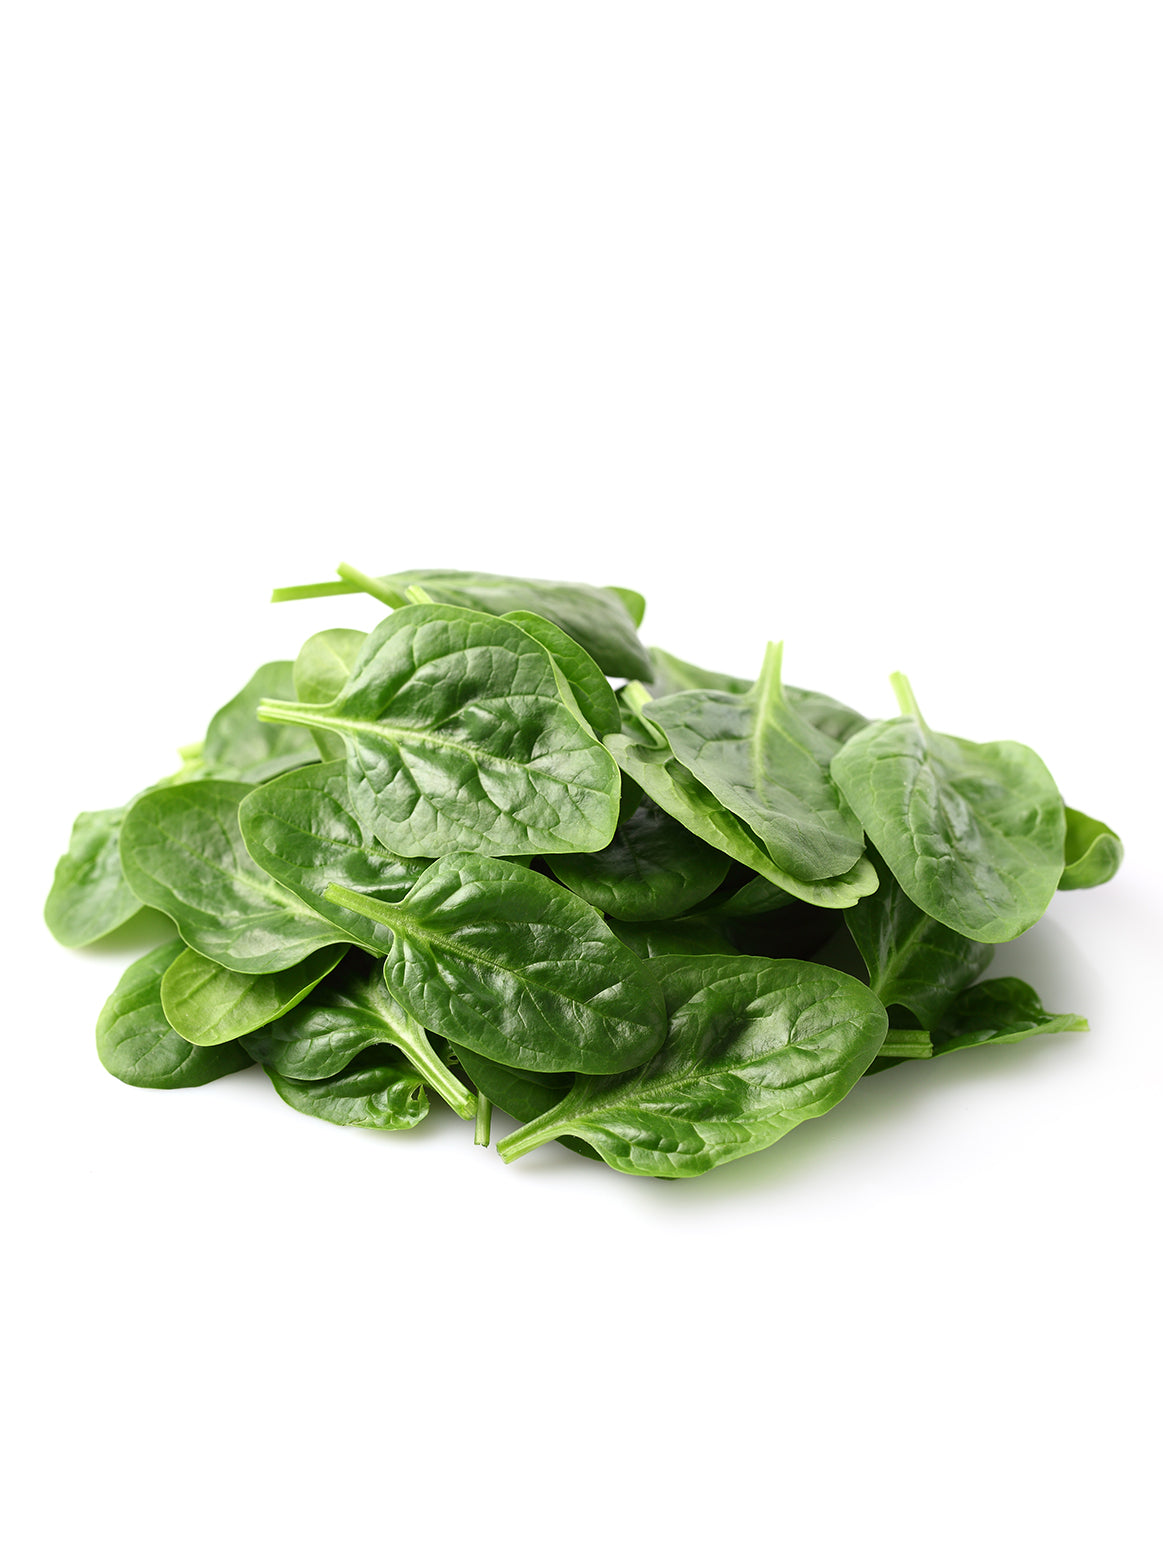 Spinach/Cello - 1 Package